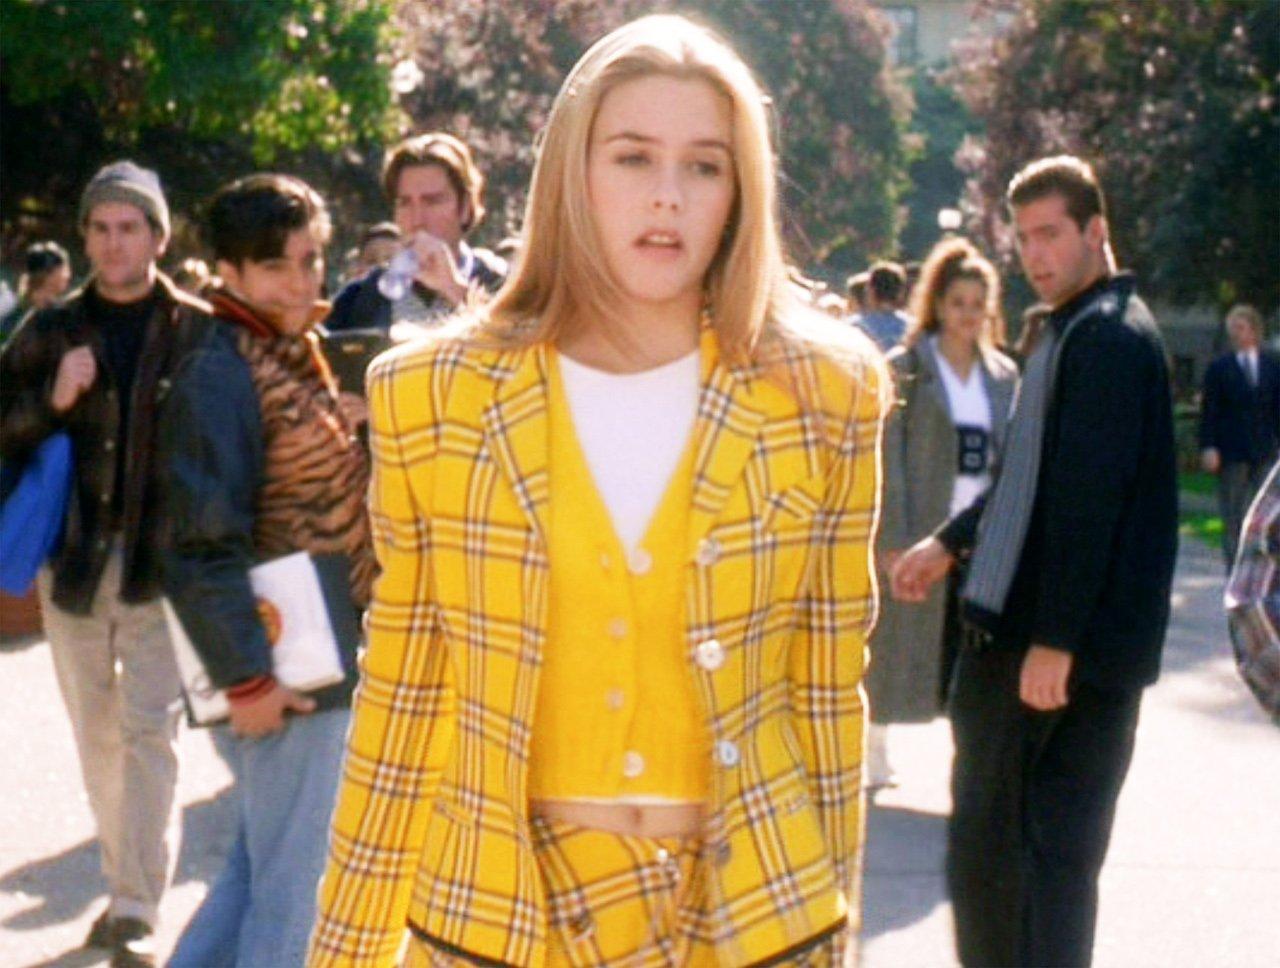 Alicia Silverstone as Cher Horowitz in 'Clueless' (1995)